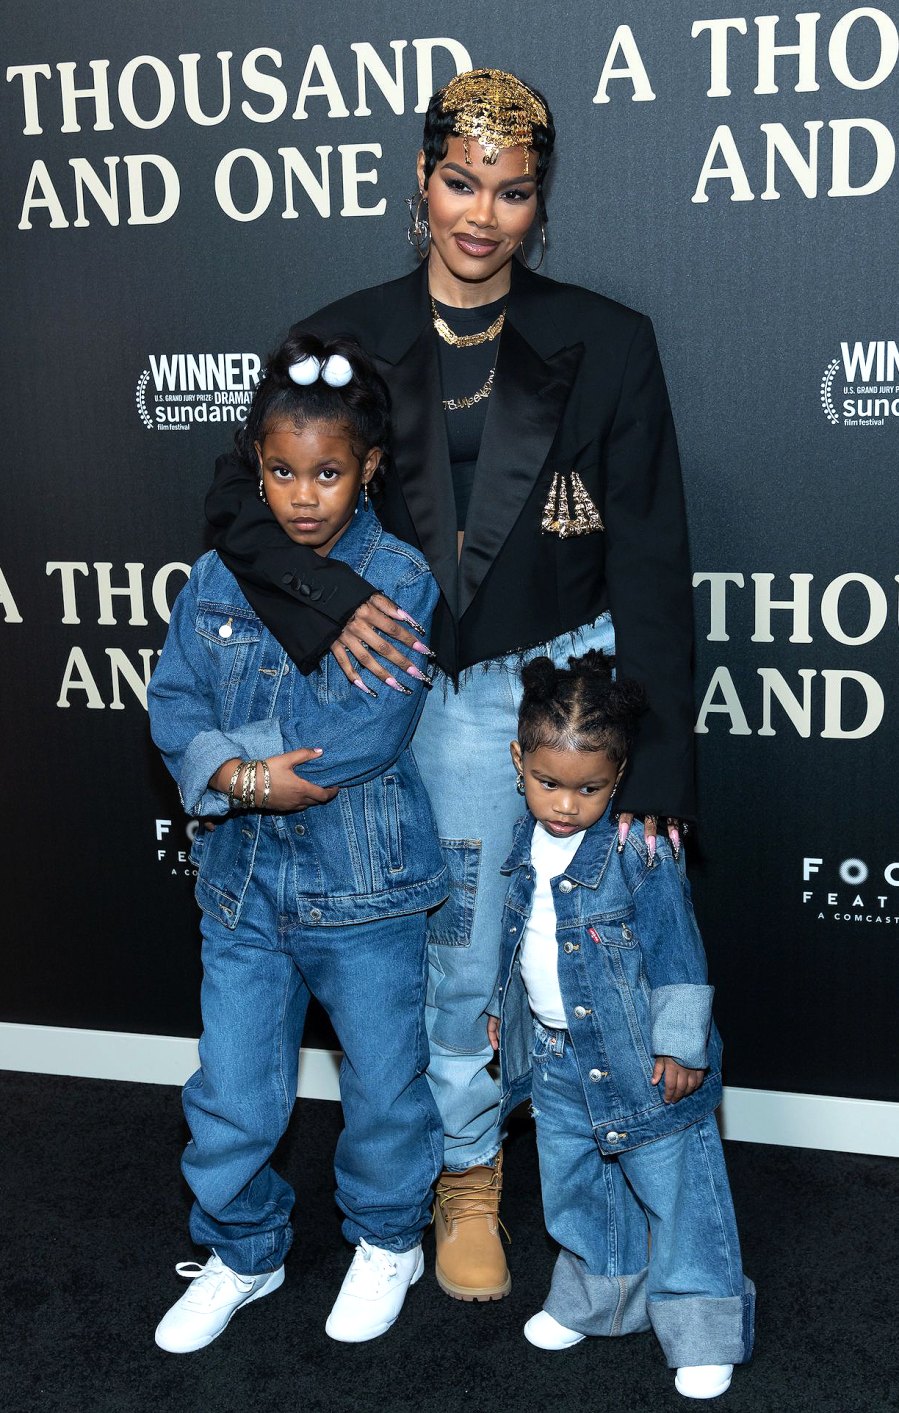 Teyana Taylor and More Celeb Moms Get Real About Postpartum Depression